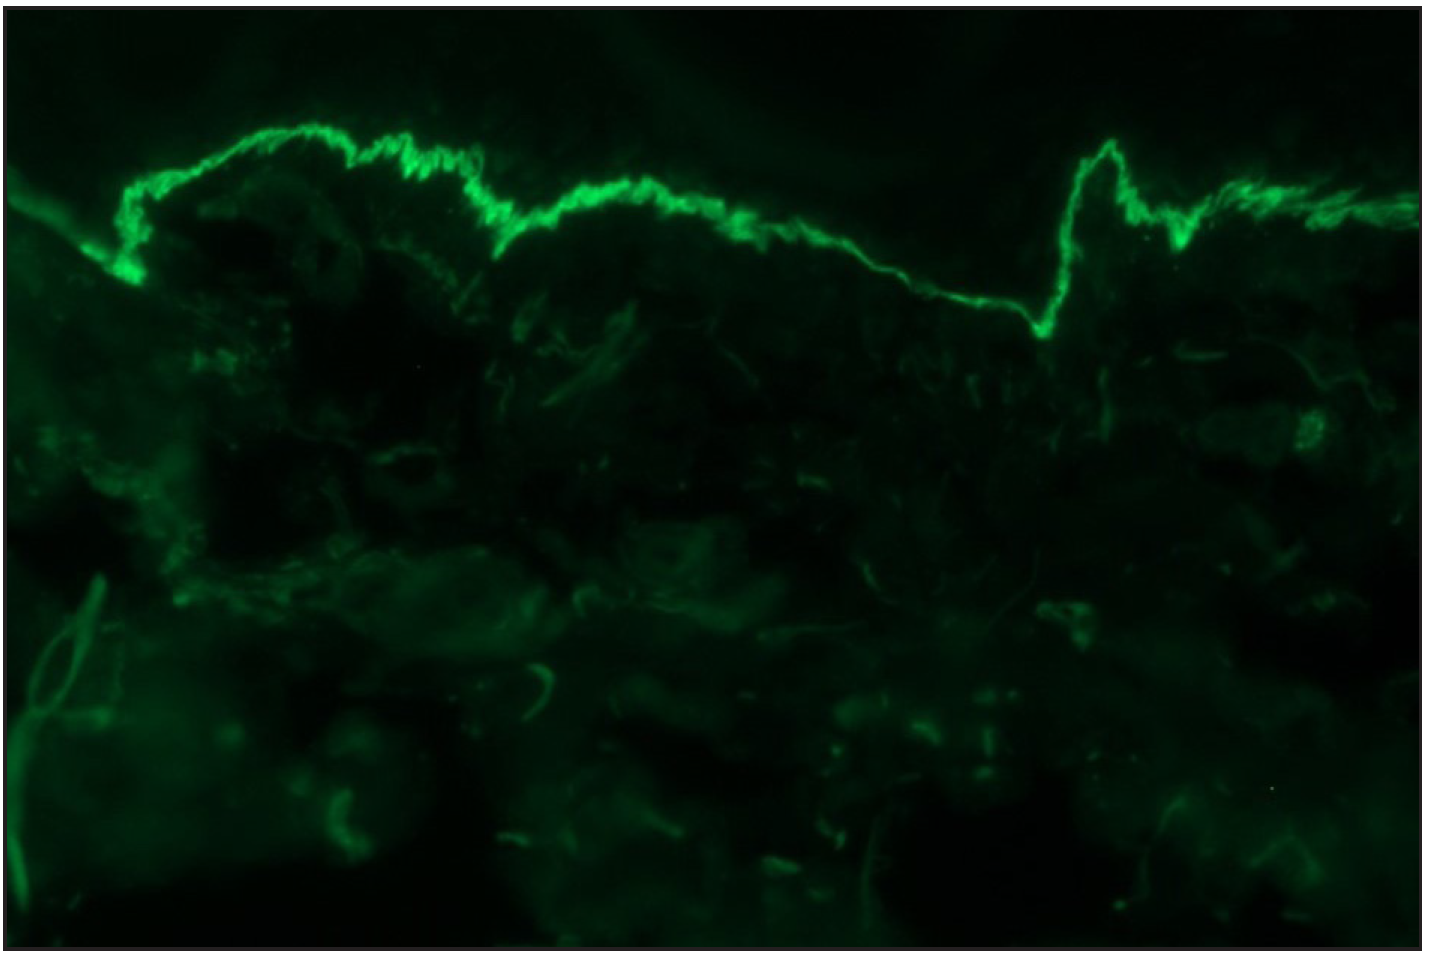 Direct immunofluorescence (DIF) in a case of suspected anti p-200 pemphigoid showing linear IgG deposition along dermoepidermal junction (fluorescein isothiocyanate, ×200)